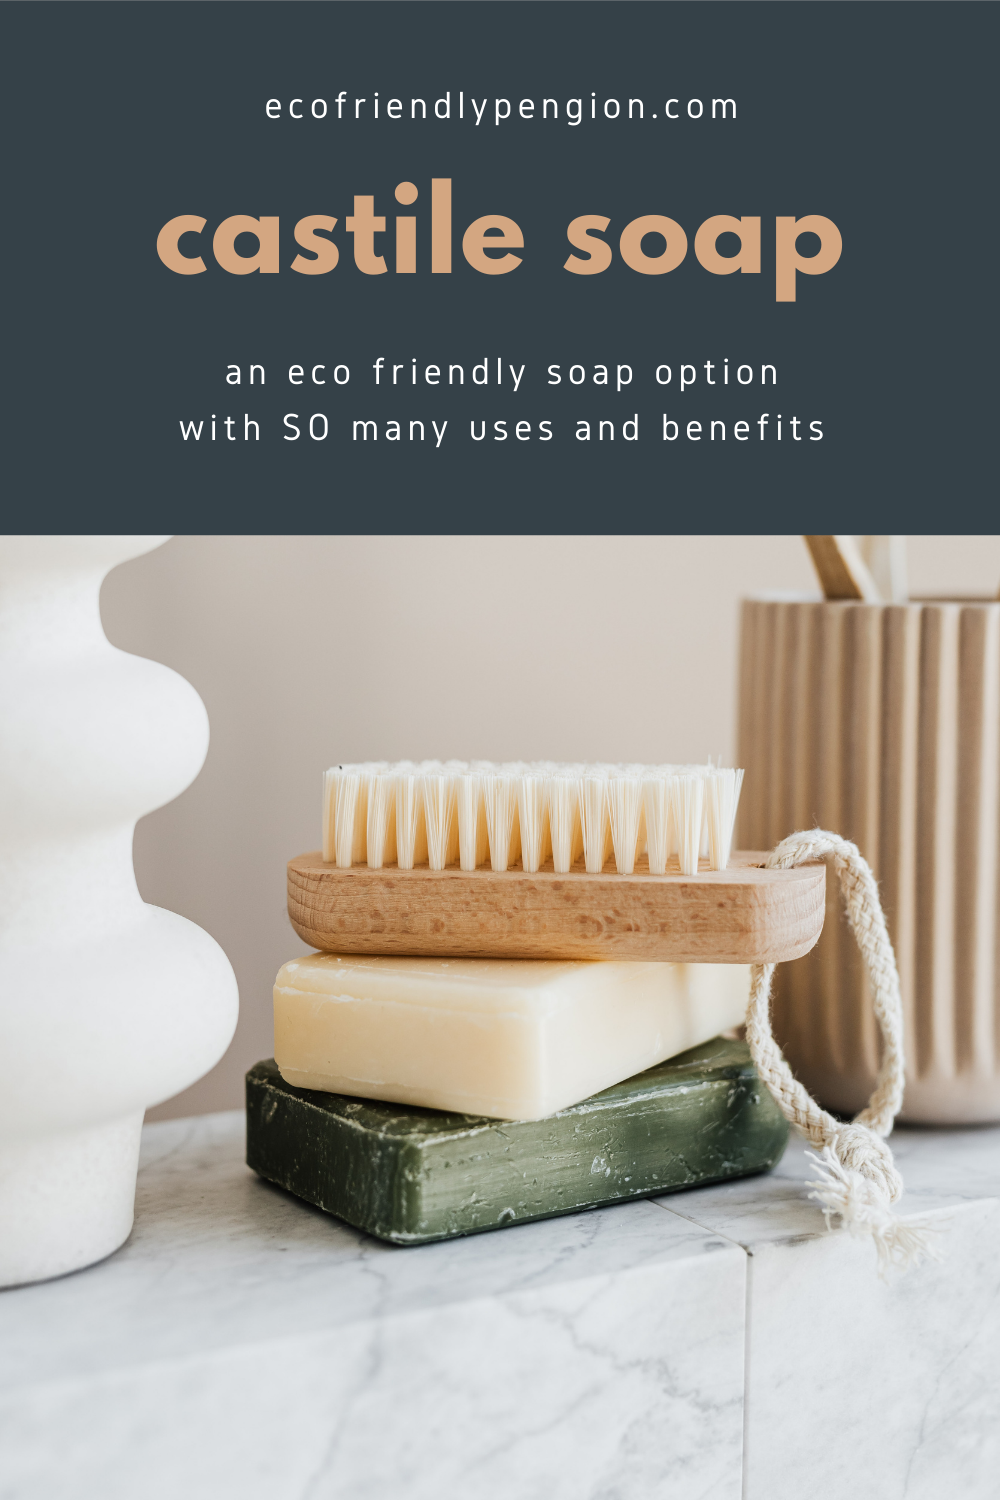 image is of soaps and it says the benefits of castile soap